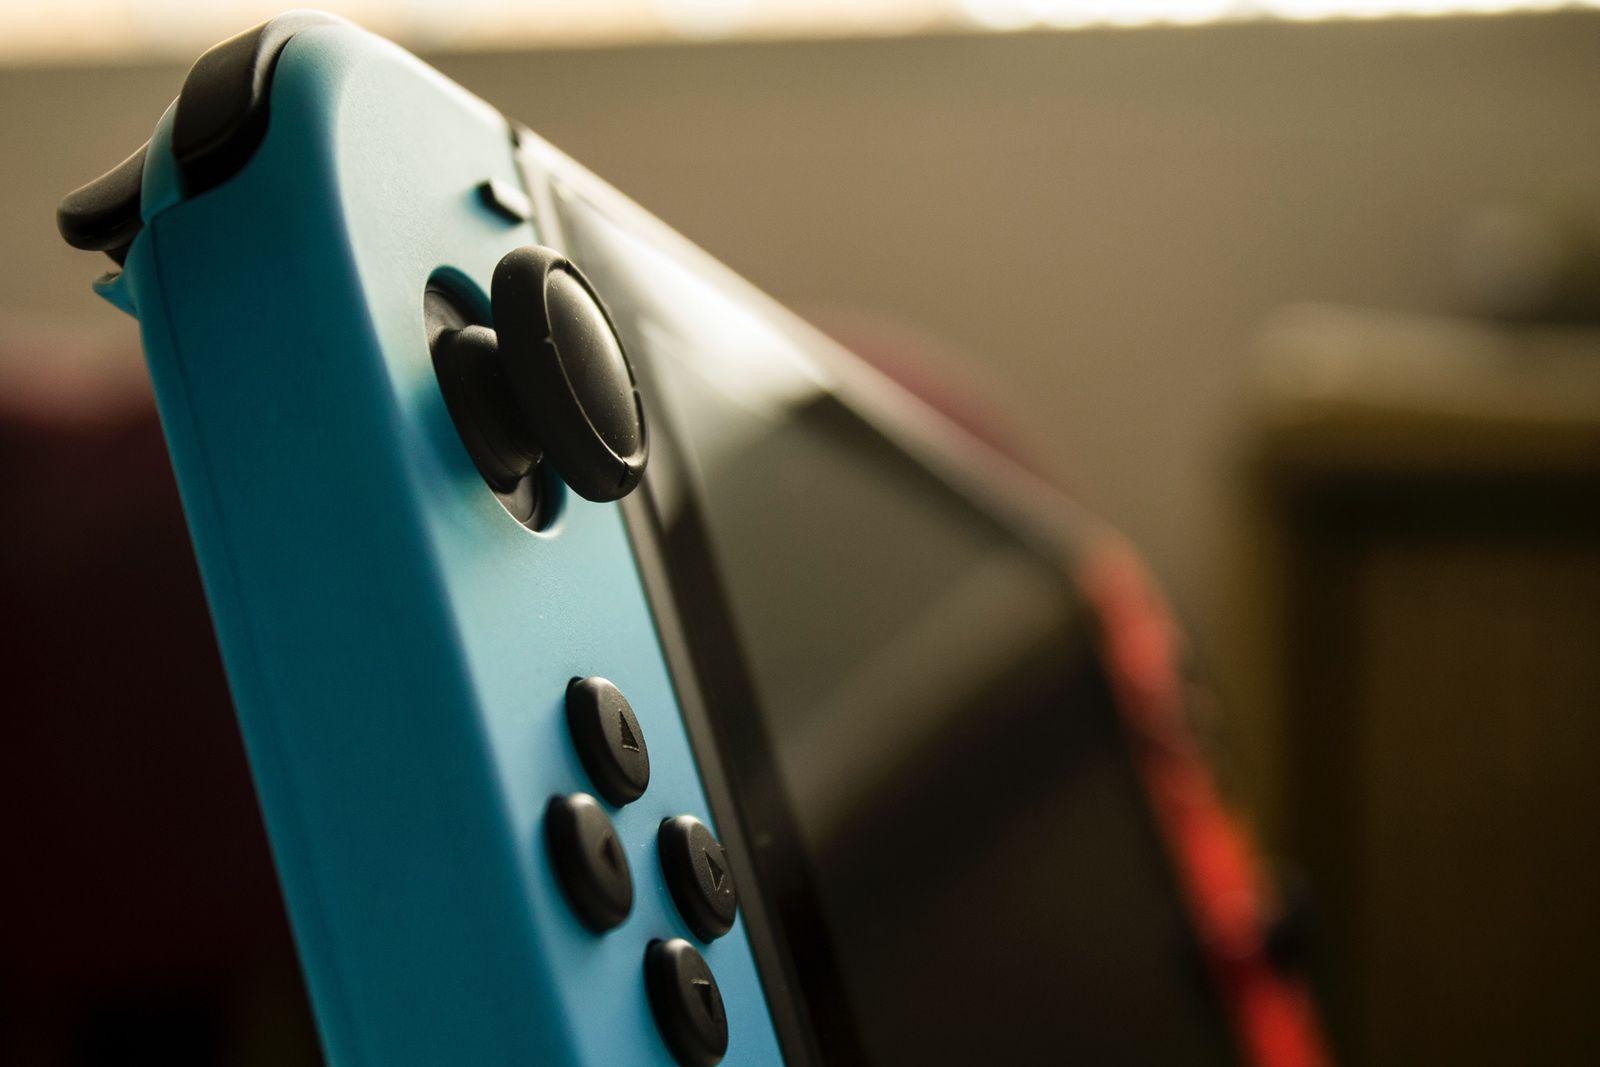 Best games console 2020: Should you get an Xbox, PlayStation or Nintendo Switch? photo 4